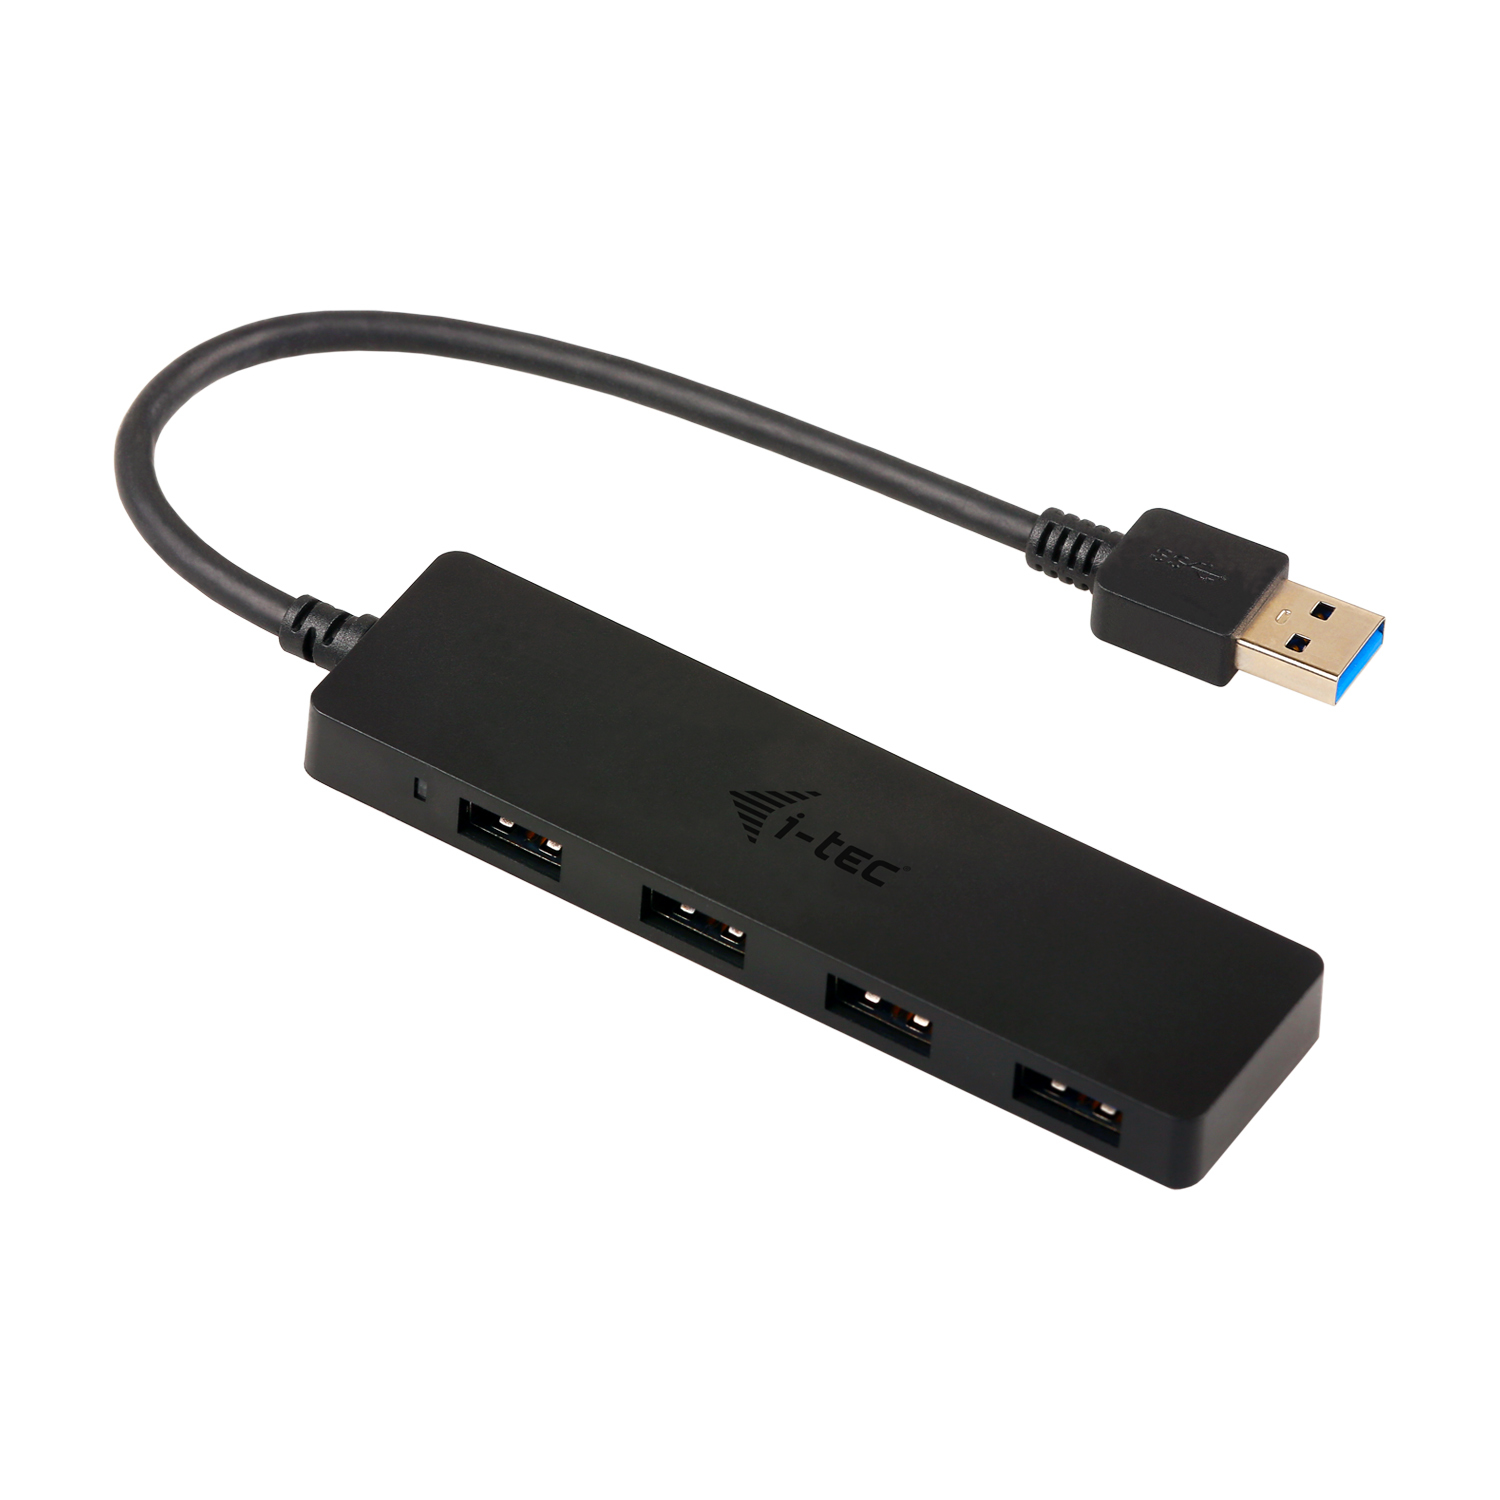  USB 3.0 Slim Passive HUB 4 Port without power adapter ideal for Notebook Ultrabook Tablet PC